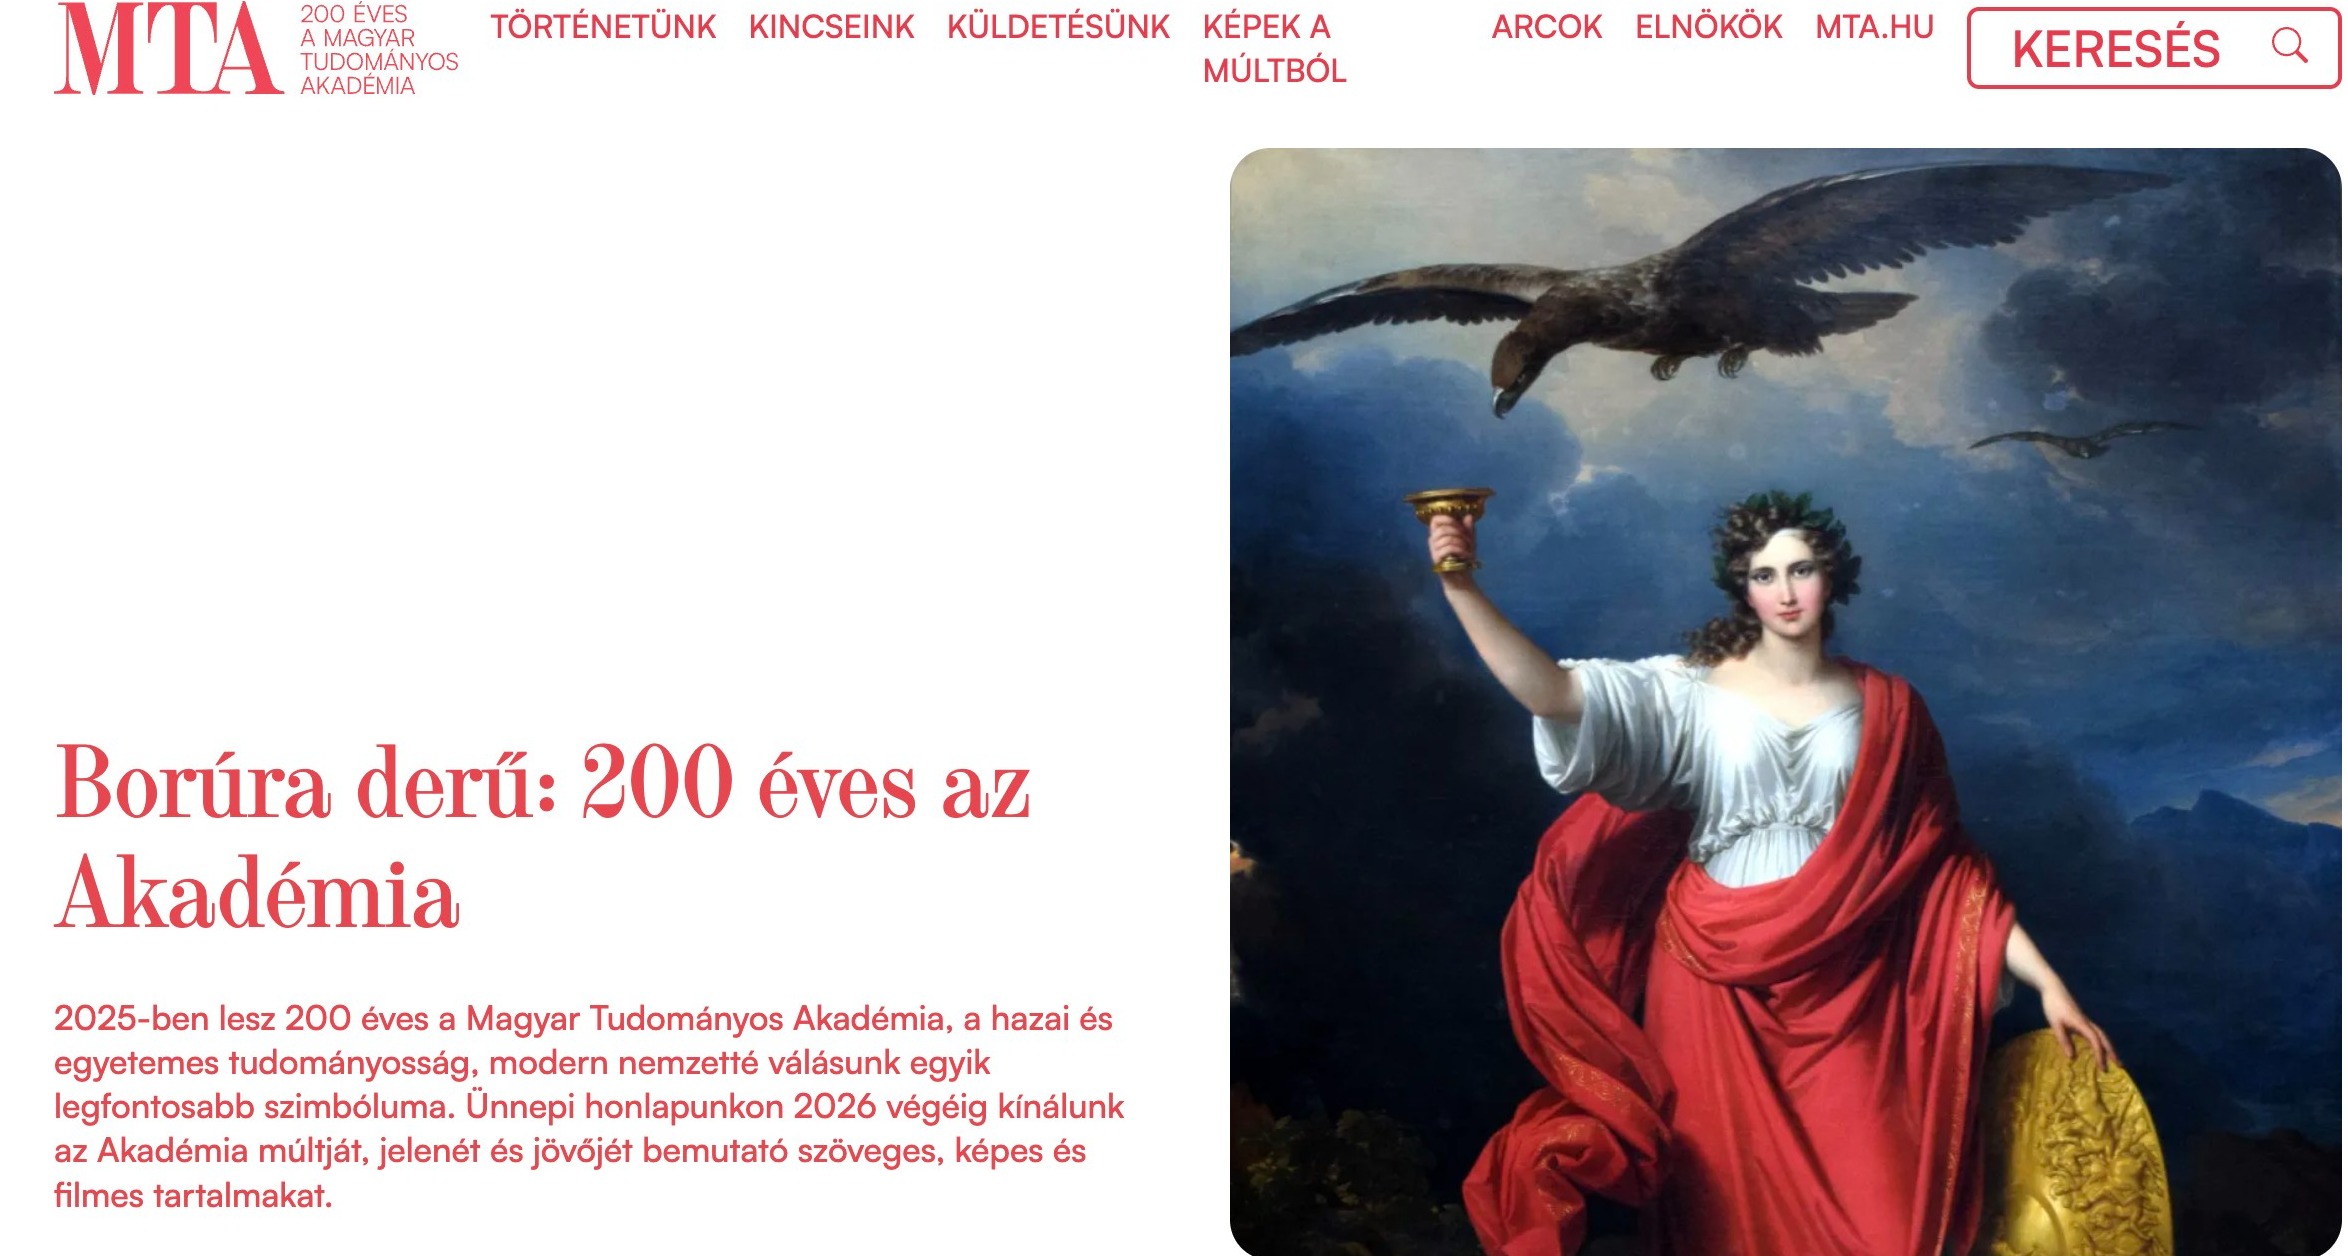 A new website honoring the 200-year-old Hungarian Academy of Sciences will be launched next year